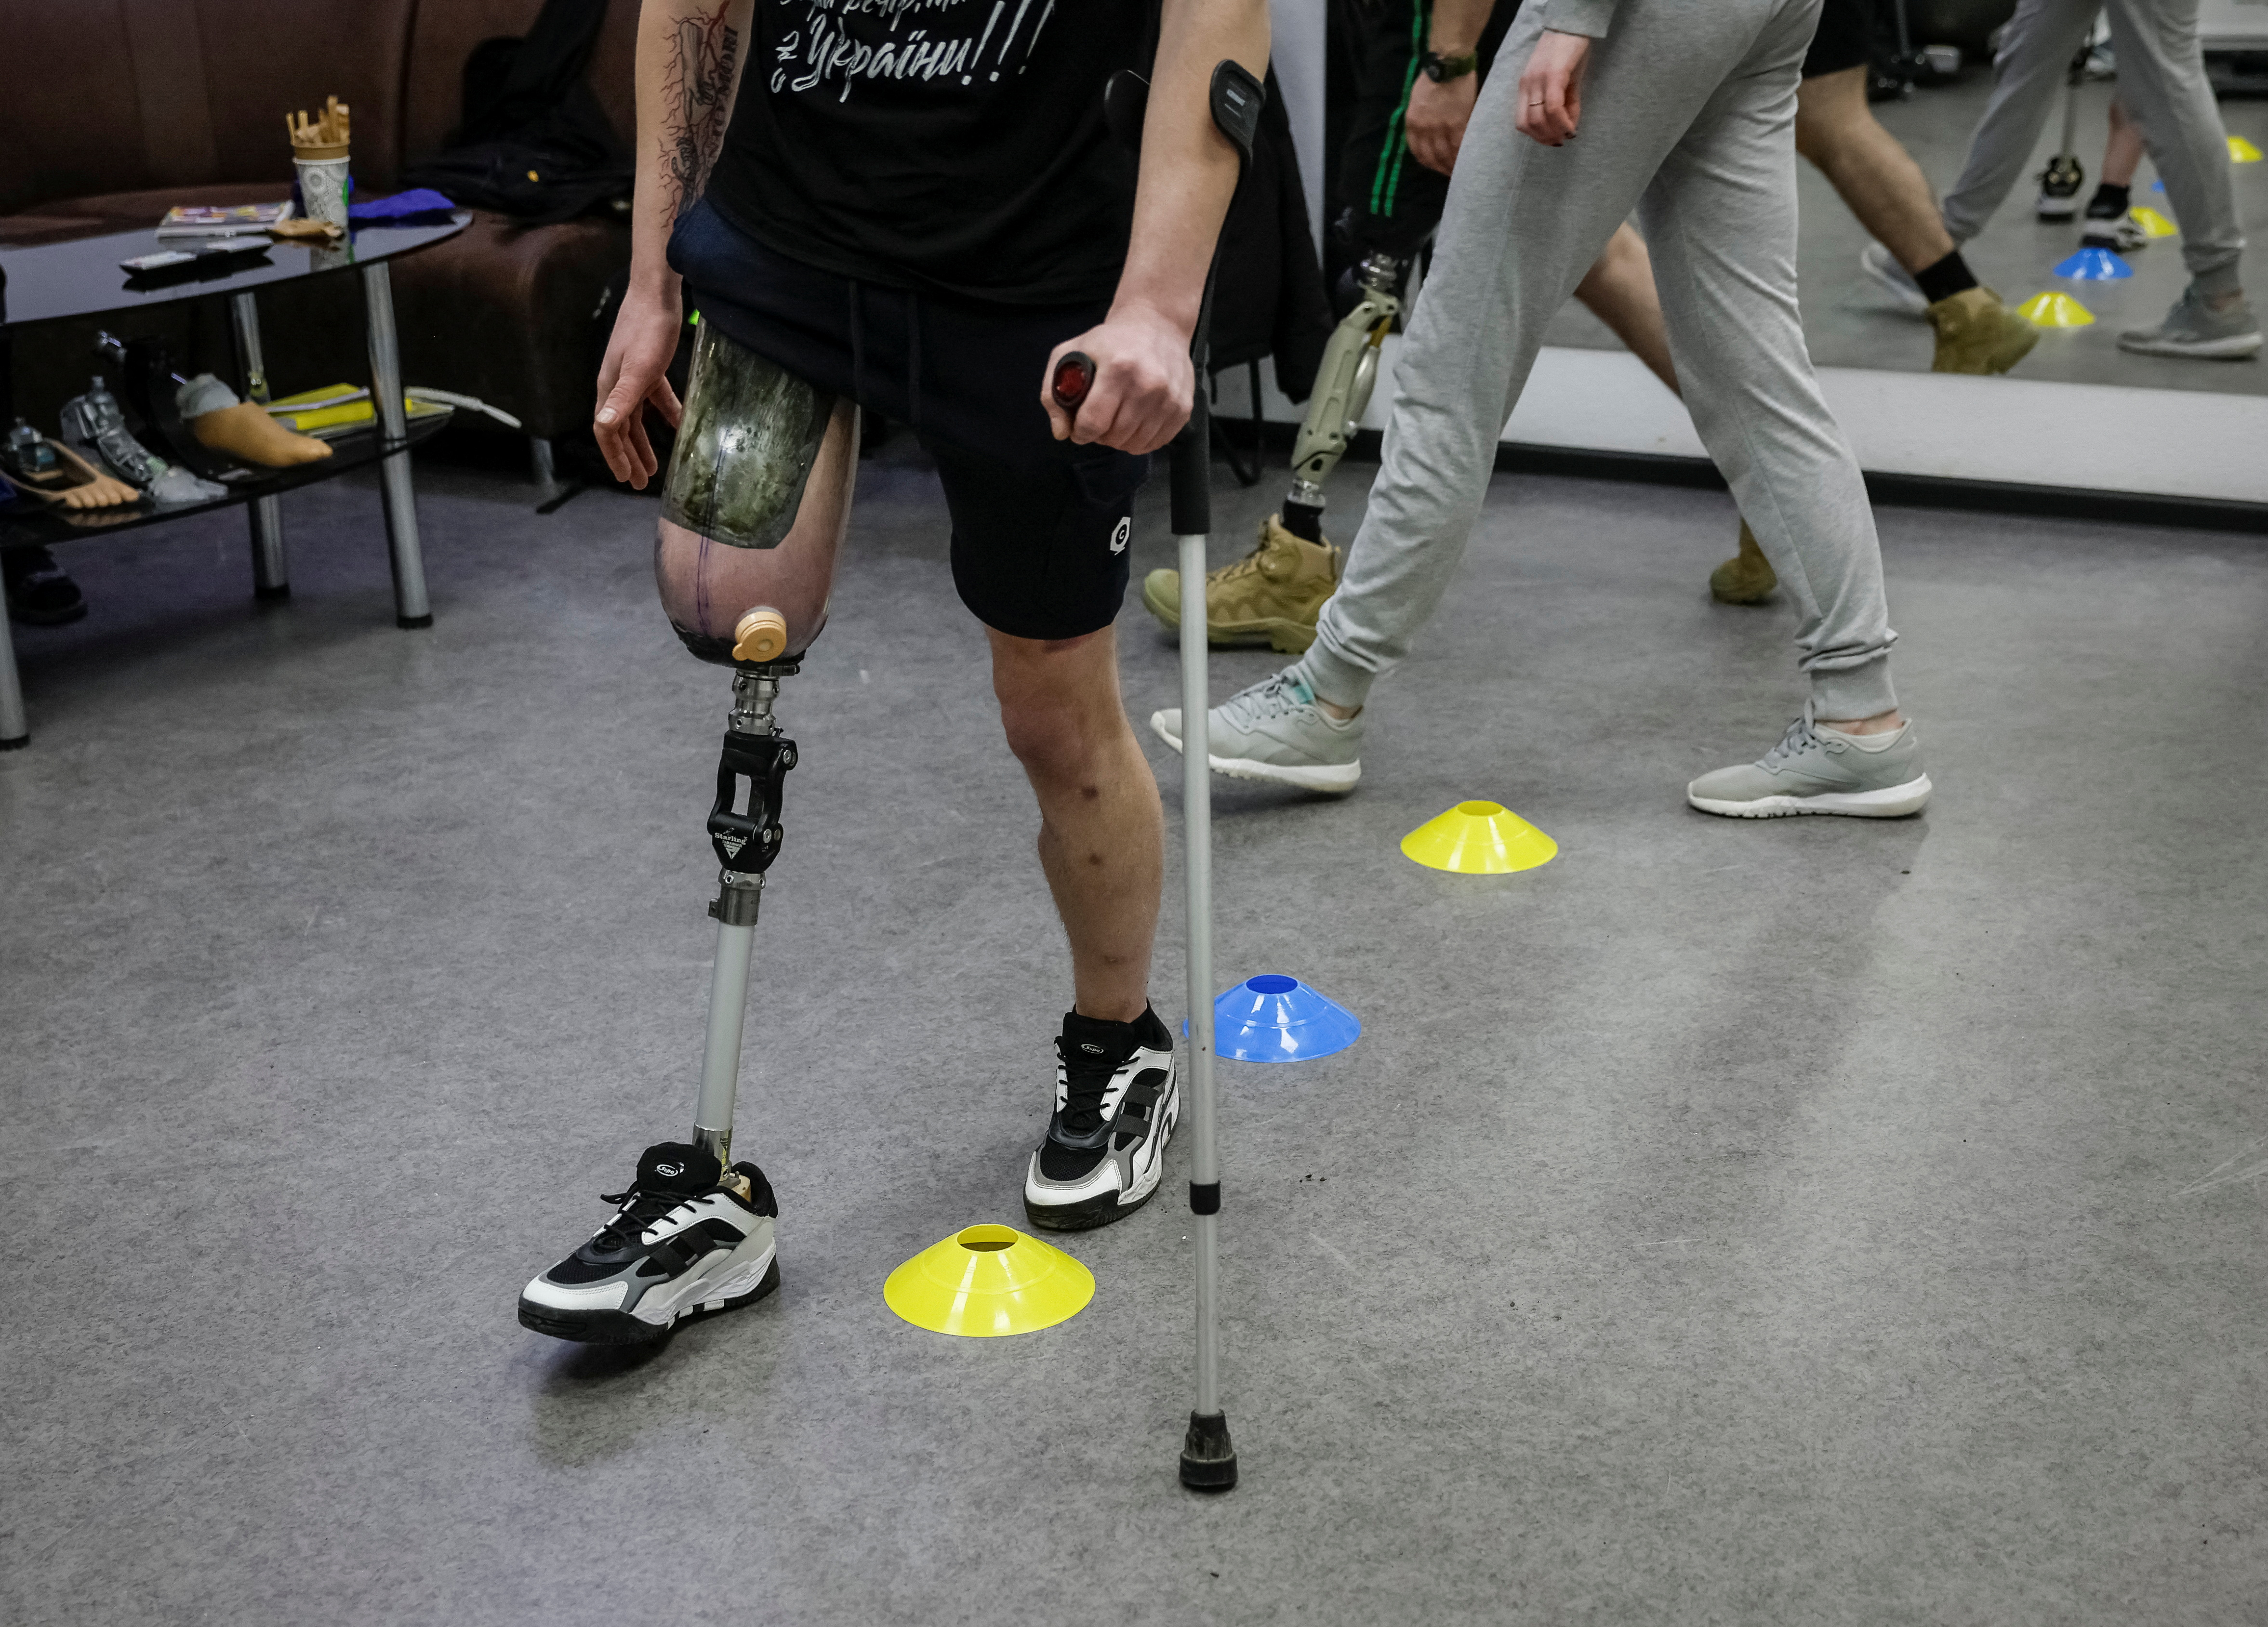 Dmytro Zilko, a soldier and a patient of the clinic exercises on a new prosthesis in the prosthetics clinic in Kyiv